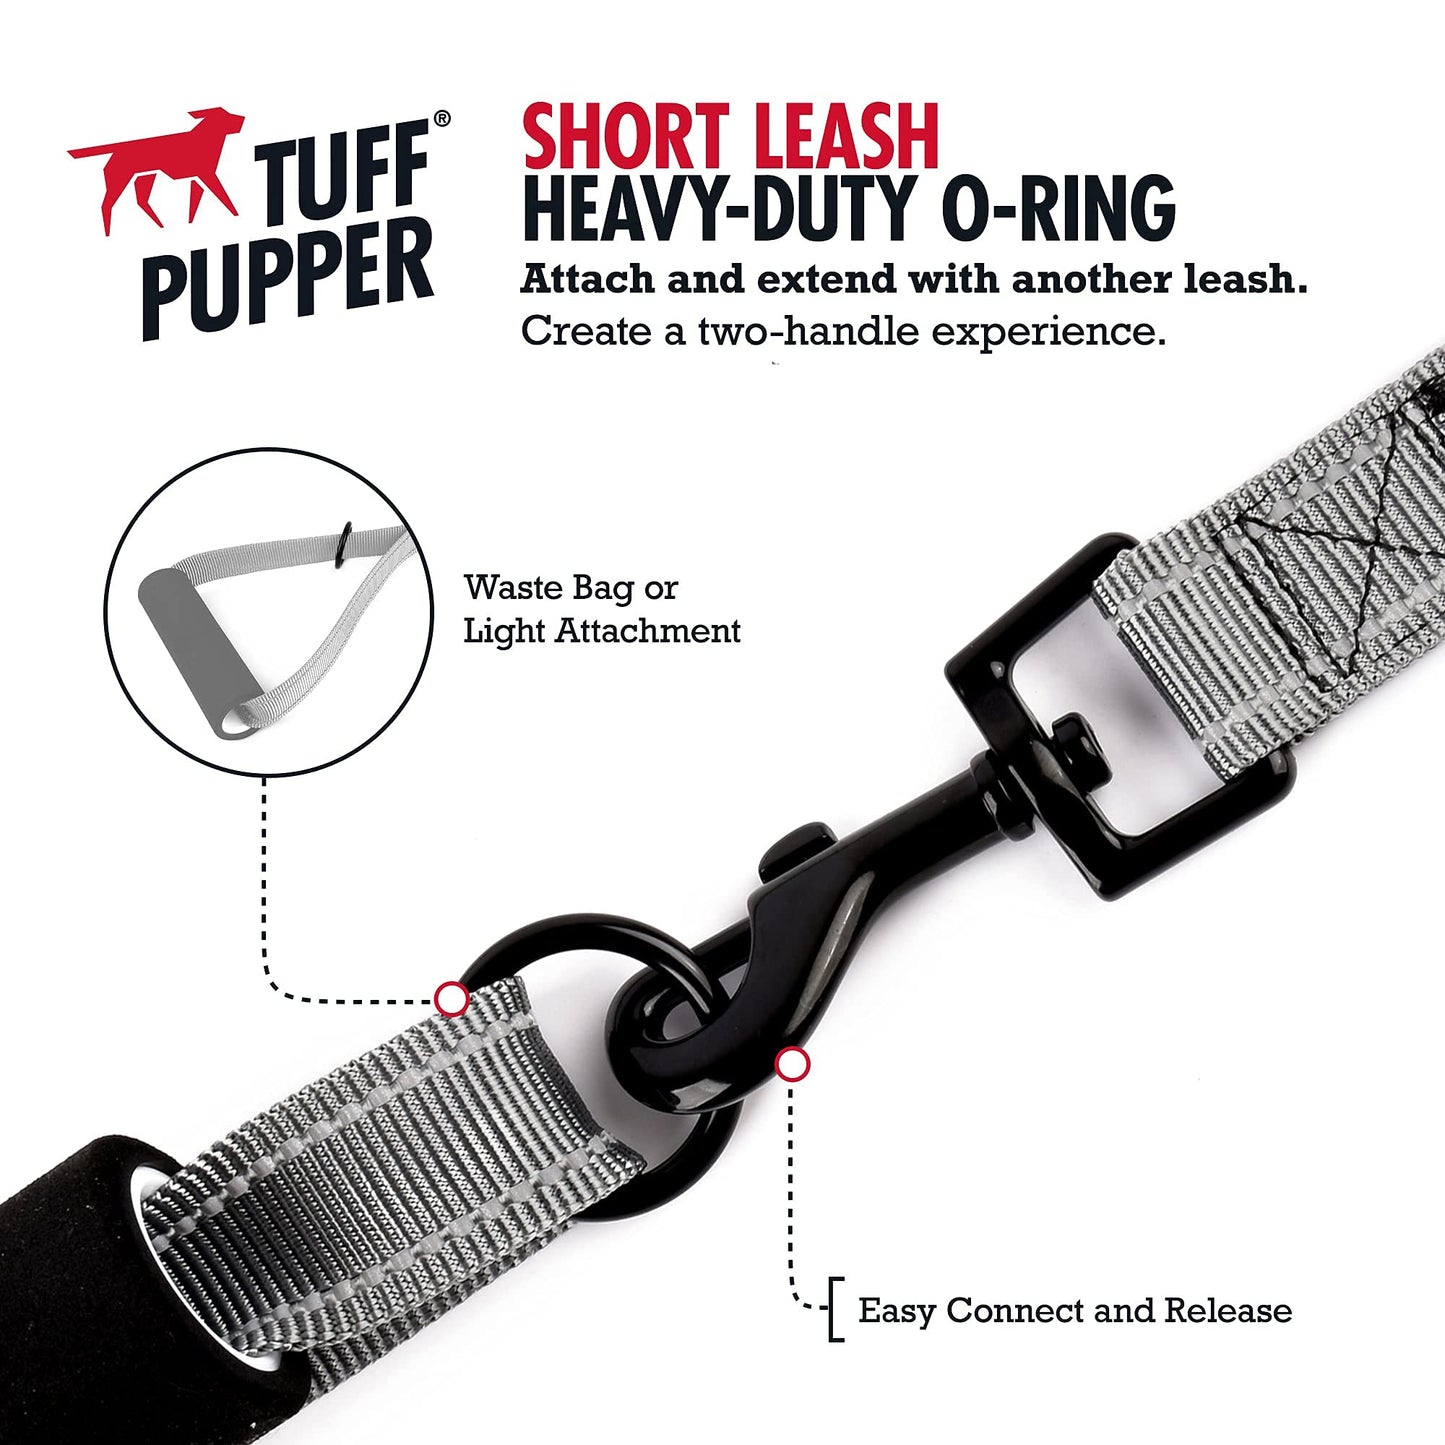 Tuff Pupper Service Dog Leash with Handle for Large Dogs | 12 Inch | Perfect for Services Dog Harness & Large Dog Training Leash | Traffic Leash Handle w/Padding | Short Leash Dog Coupler